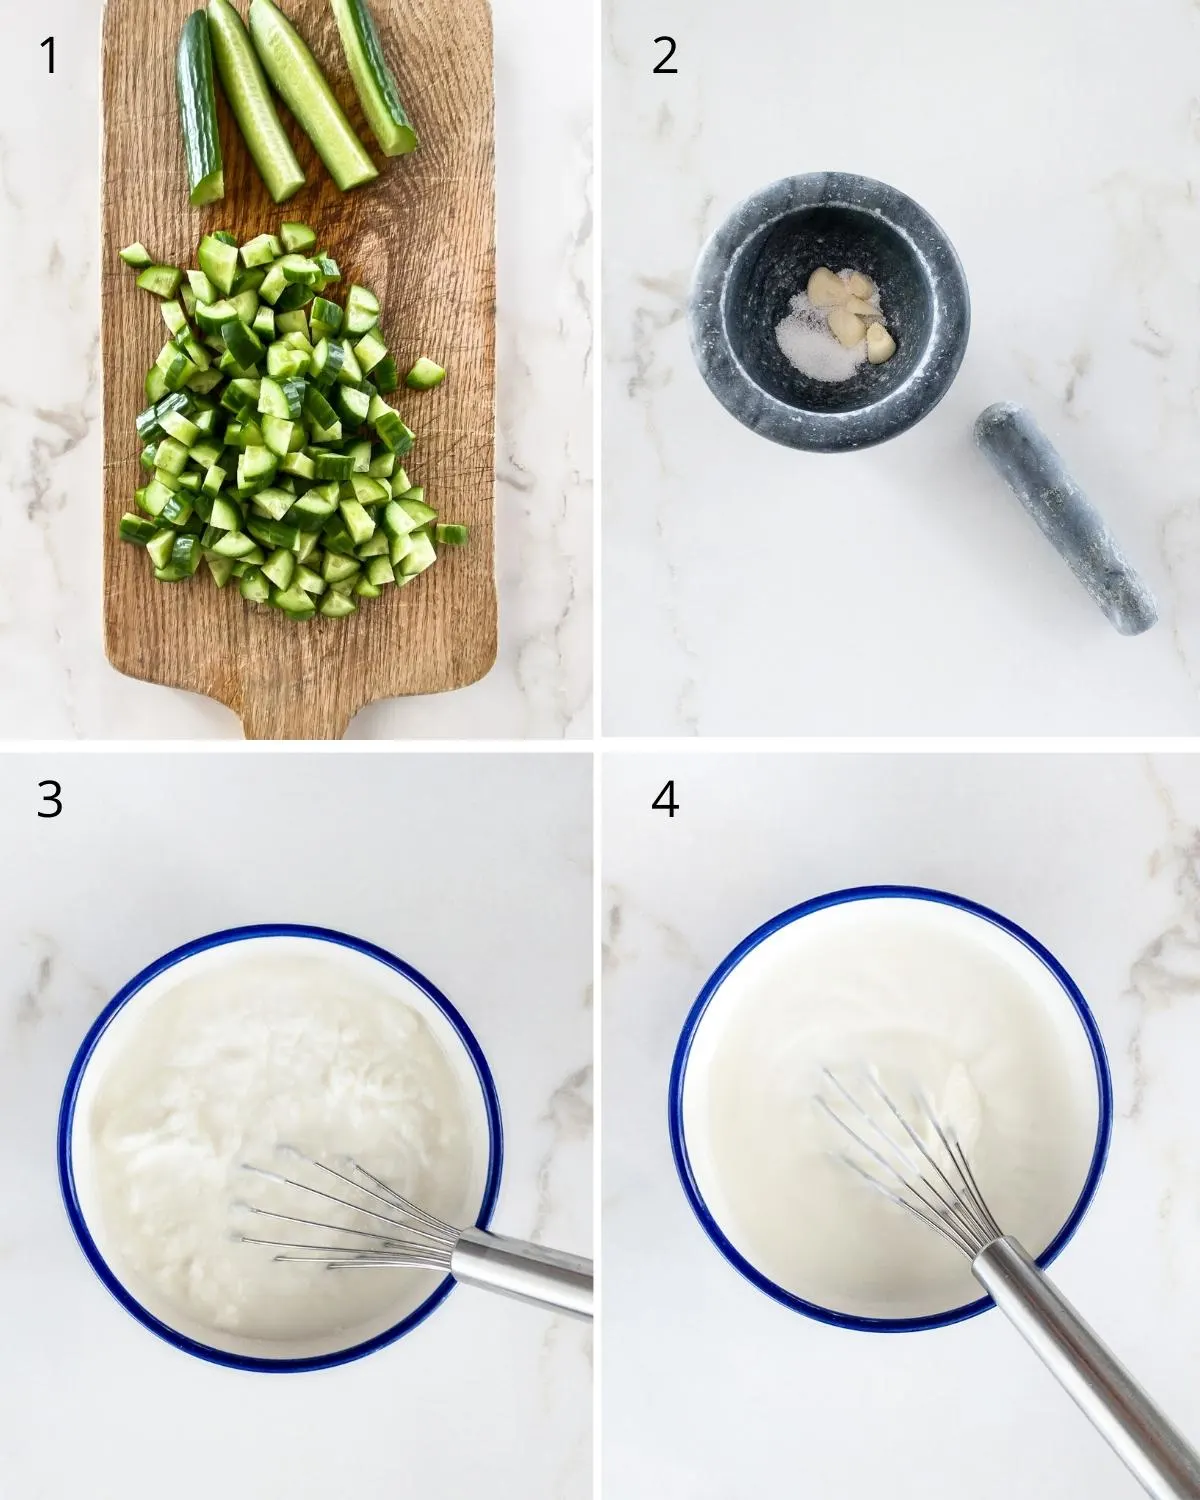 Step-by-step images of how to make cucumber and yogurt salad.